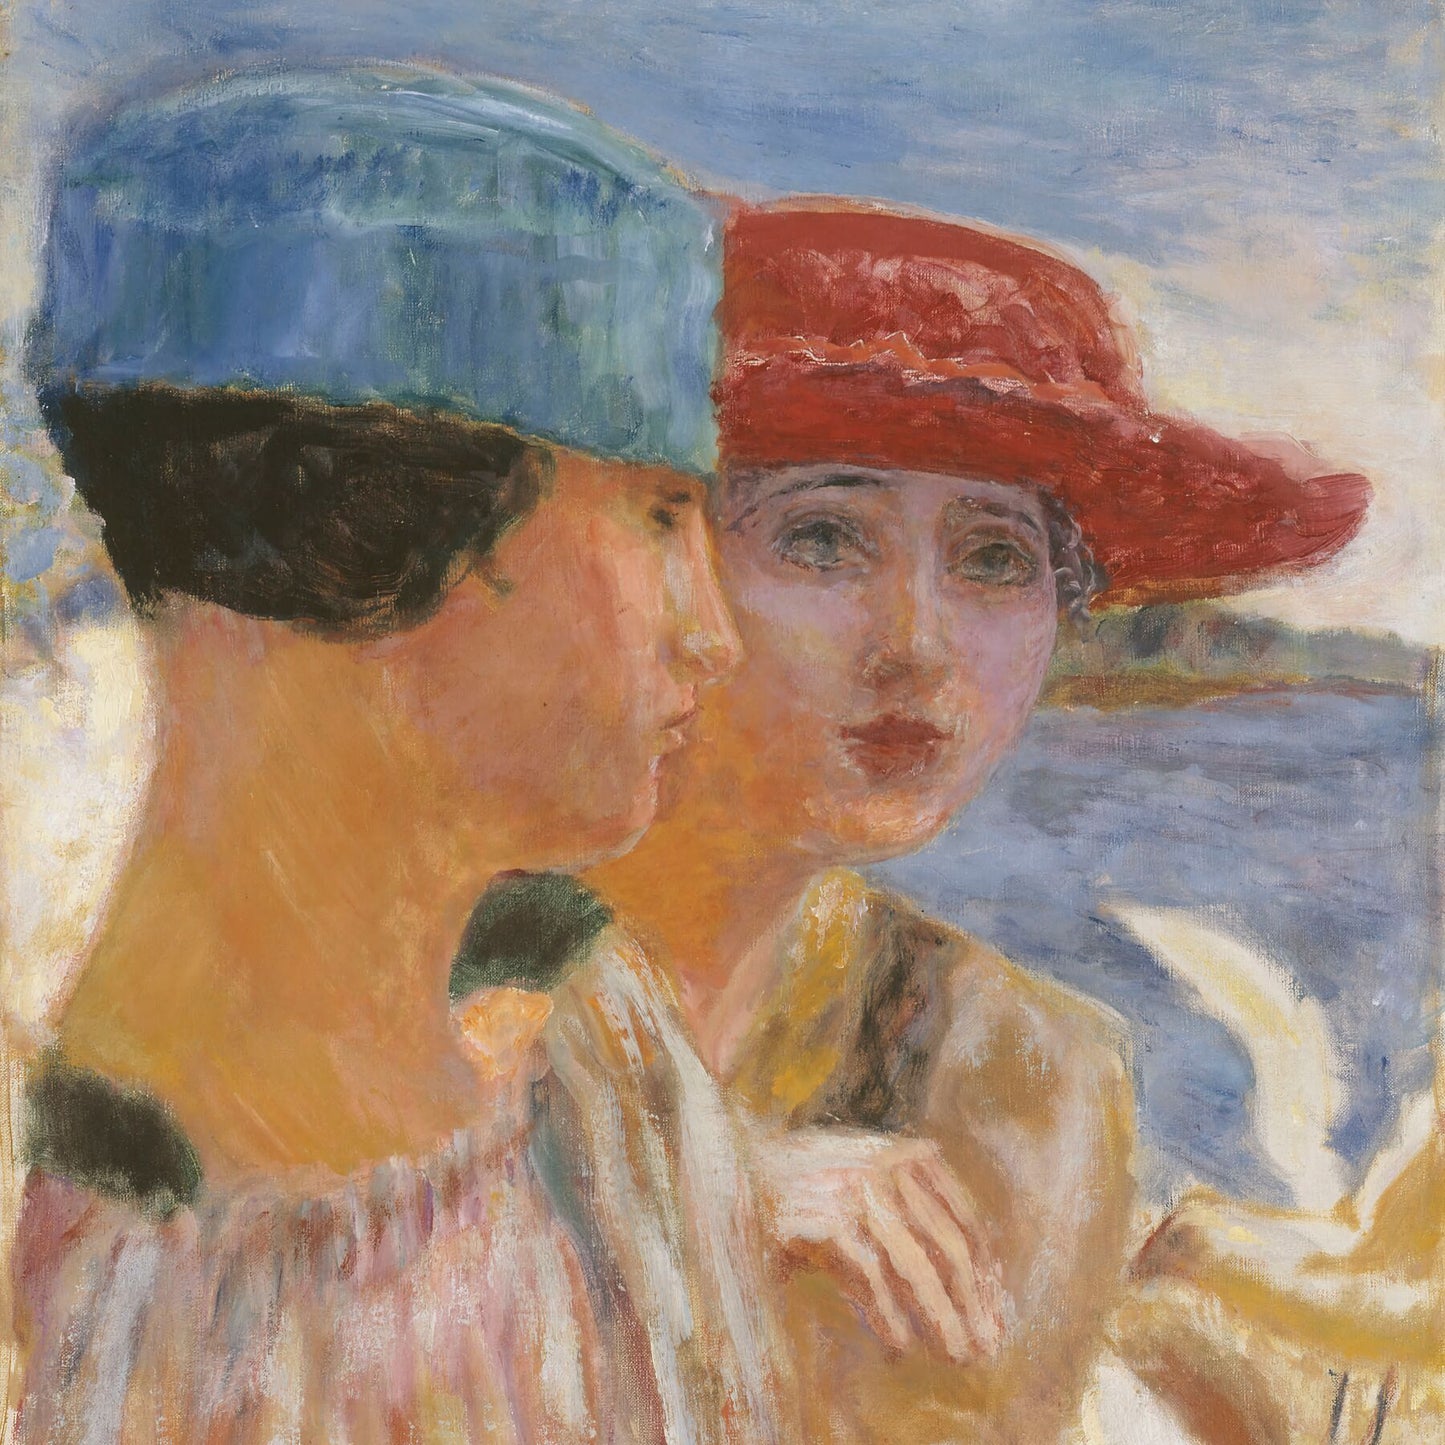 Young Women with a Seagull (detail) by Pierre Bonnard - 1917